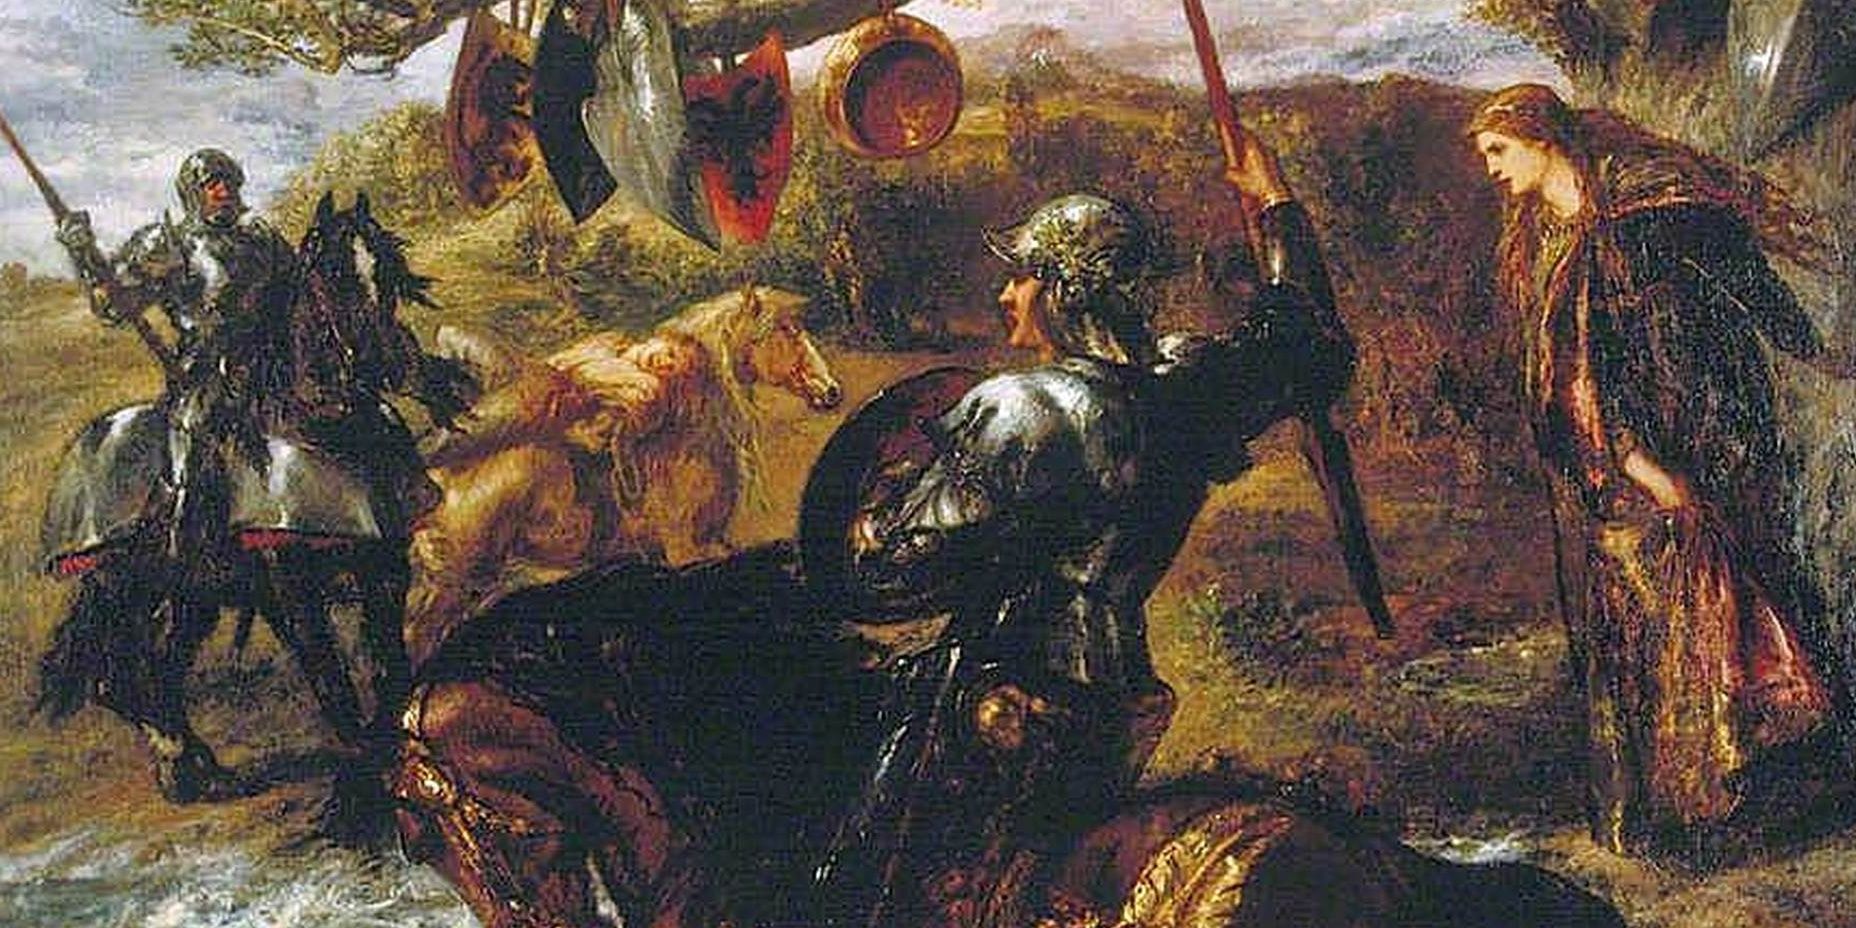 10 Arthurian Tales That Deserve The Green Knight Treatment